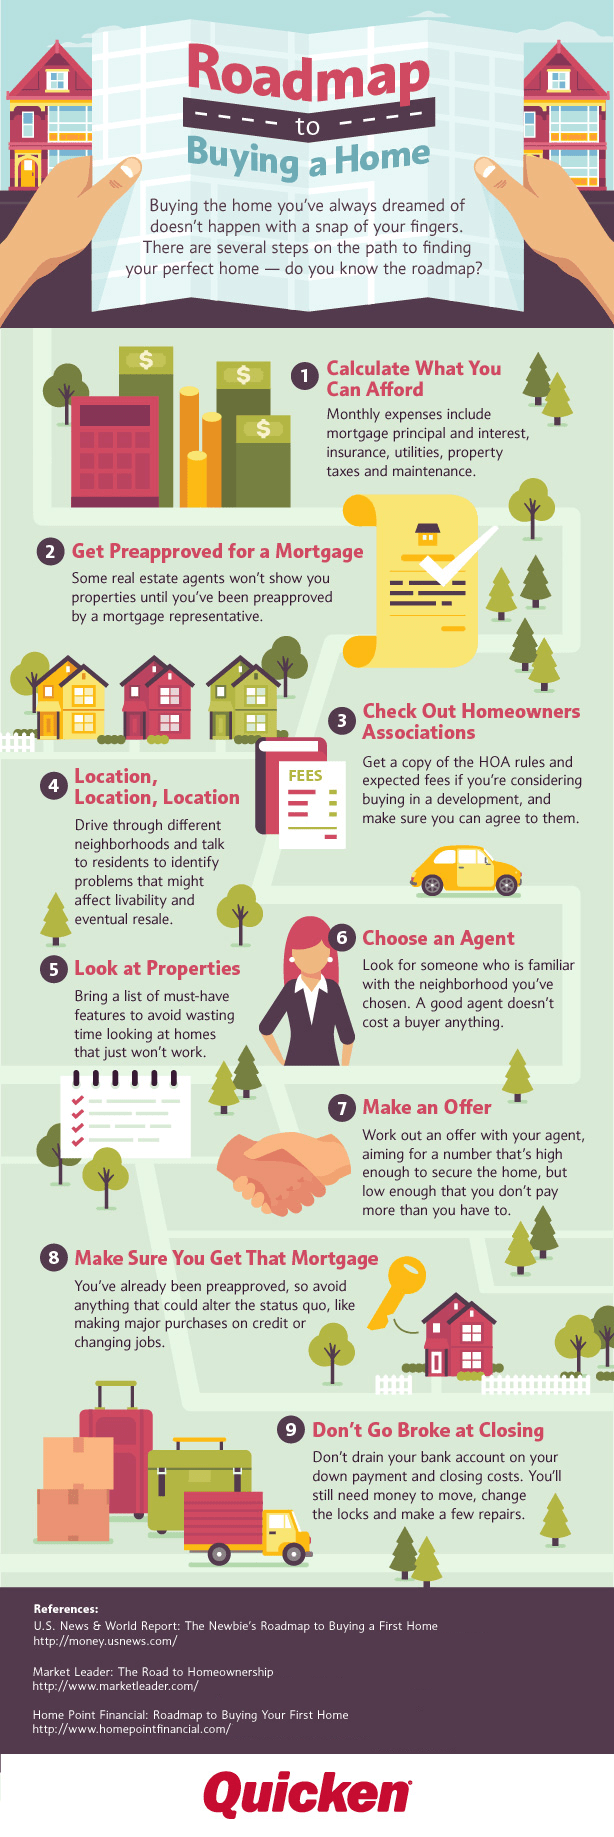 Roadmap to Buying a Home Infographic